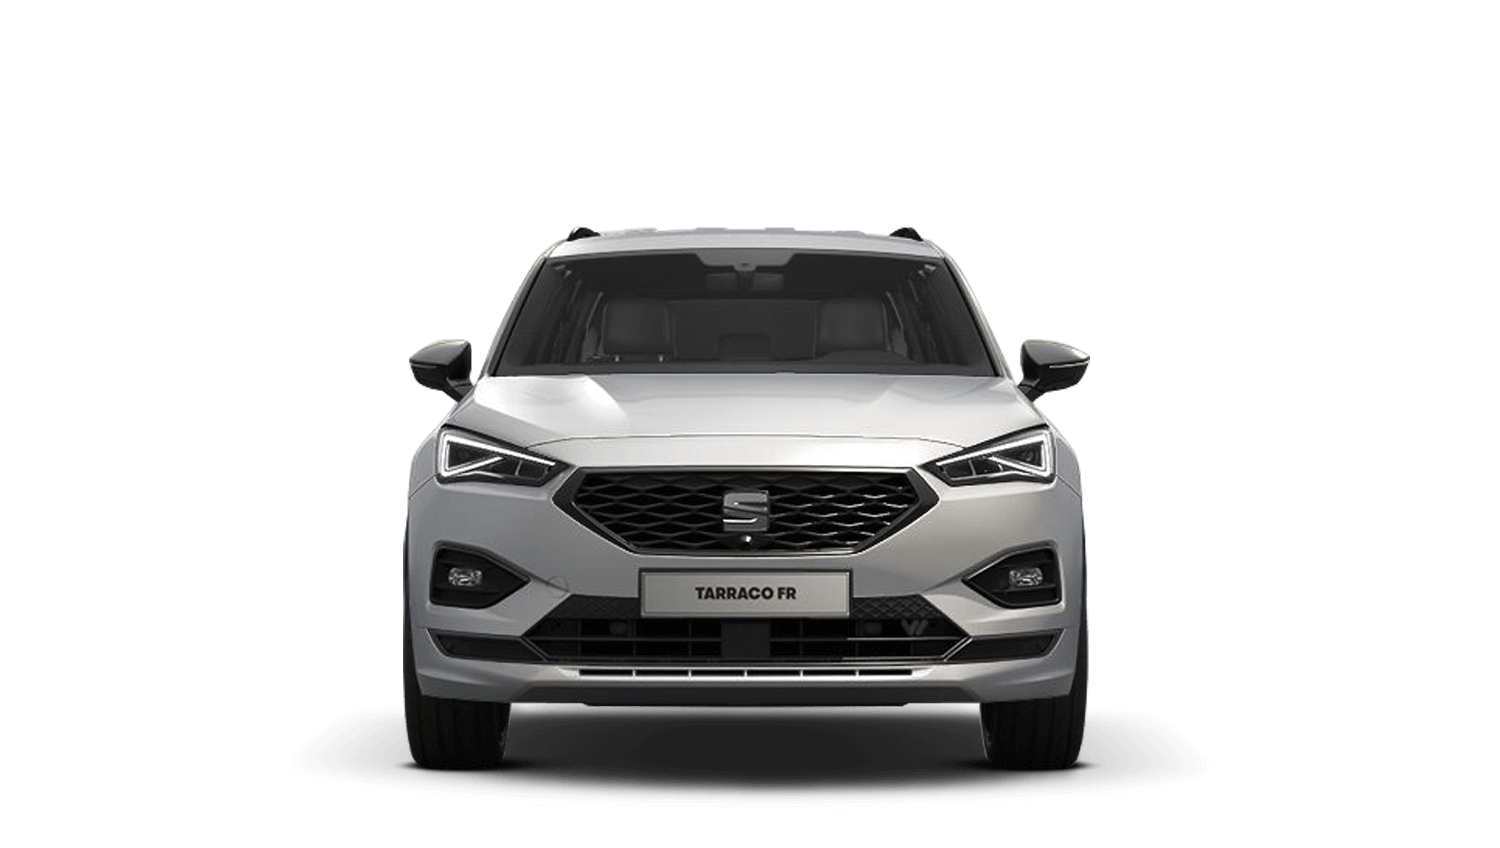 https://web21st.imgix.net/assets/images/new-vehicles/seat/seat-tarraco-2018-fr-sport-front-oryx-white.png